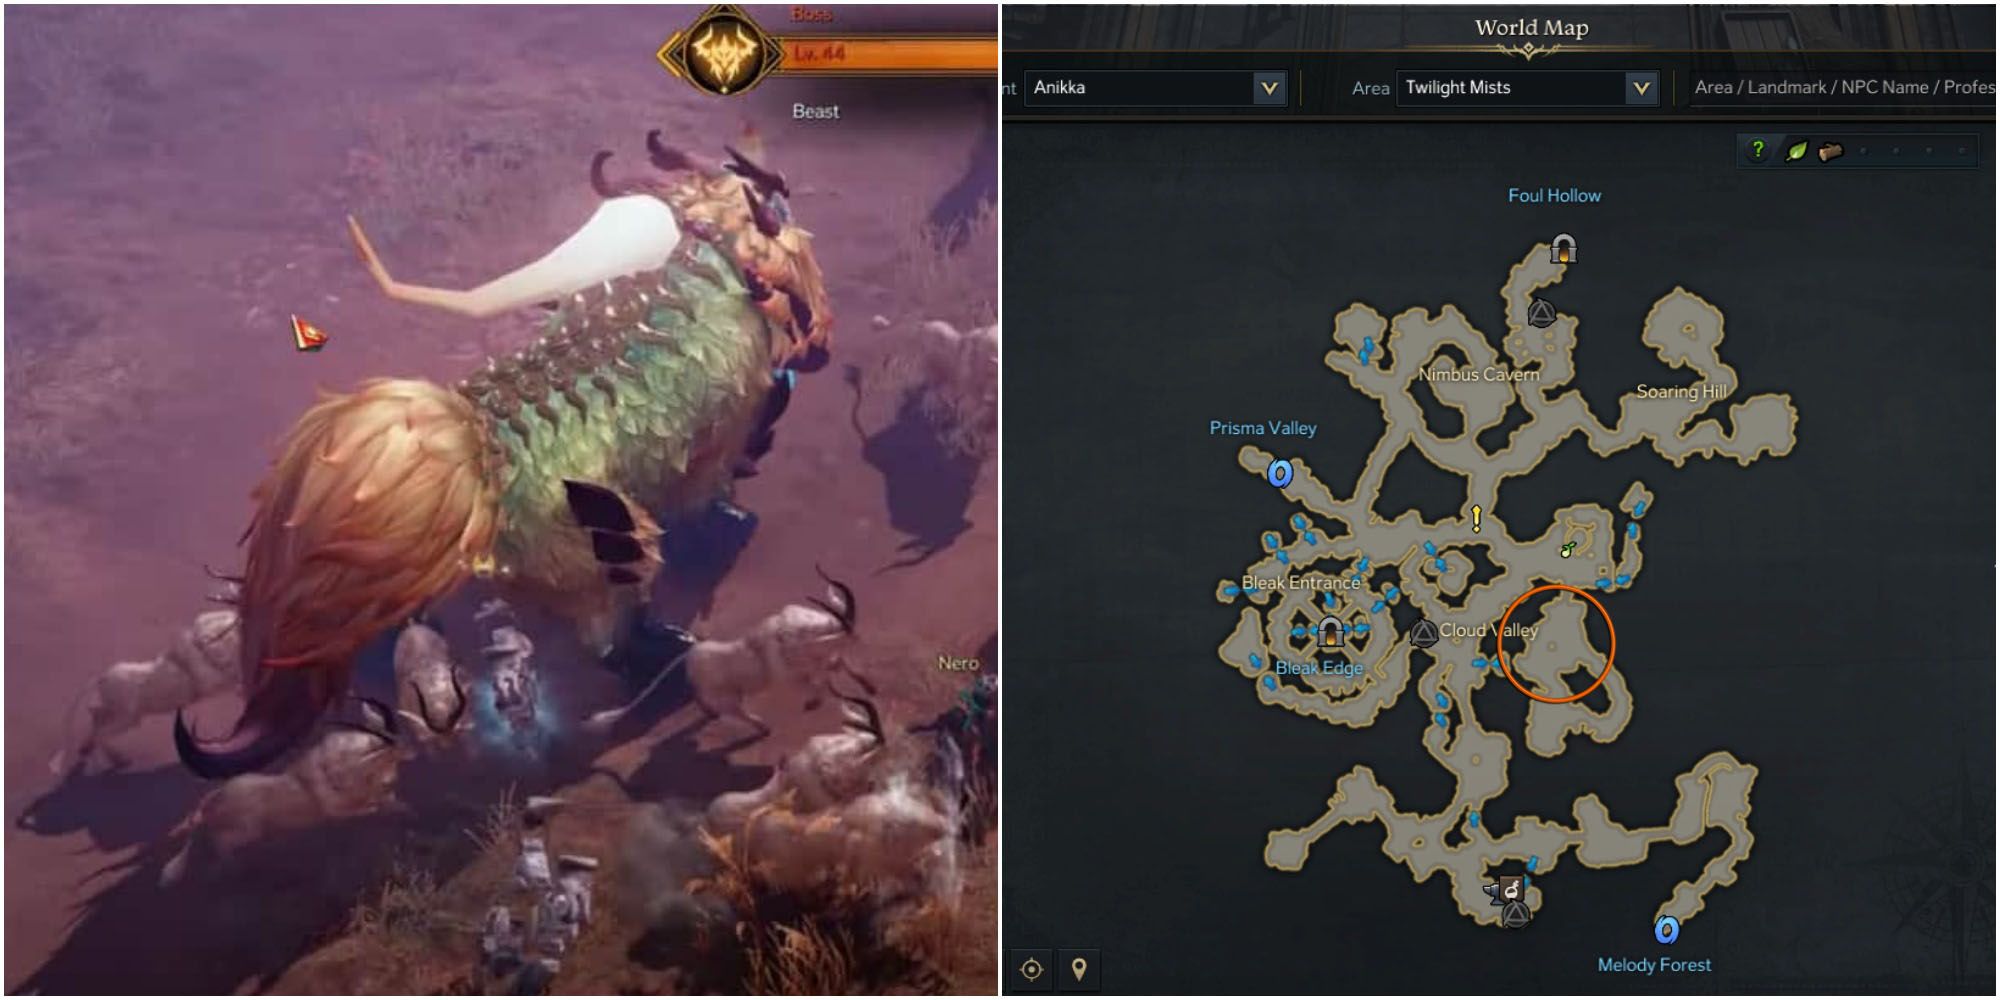 Split image of Chuo boss fight and Twilight Mists map with location circled